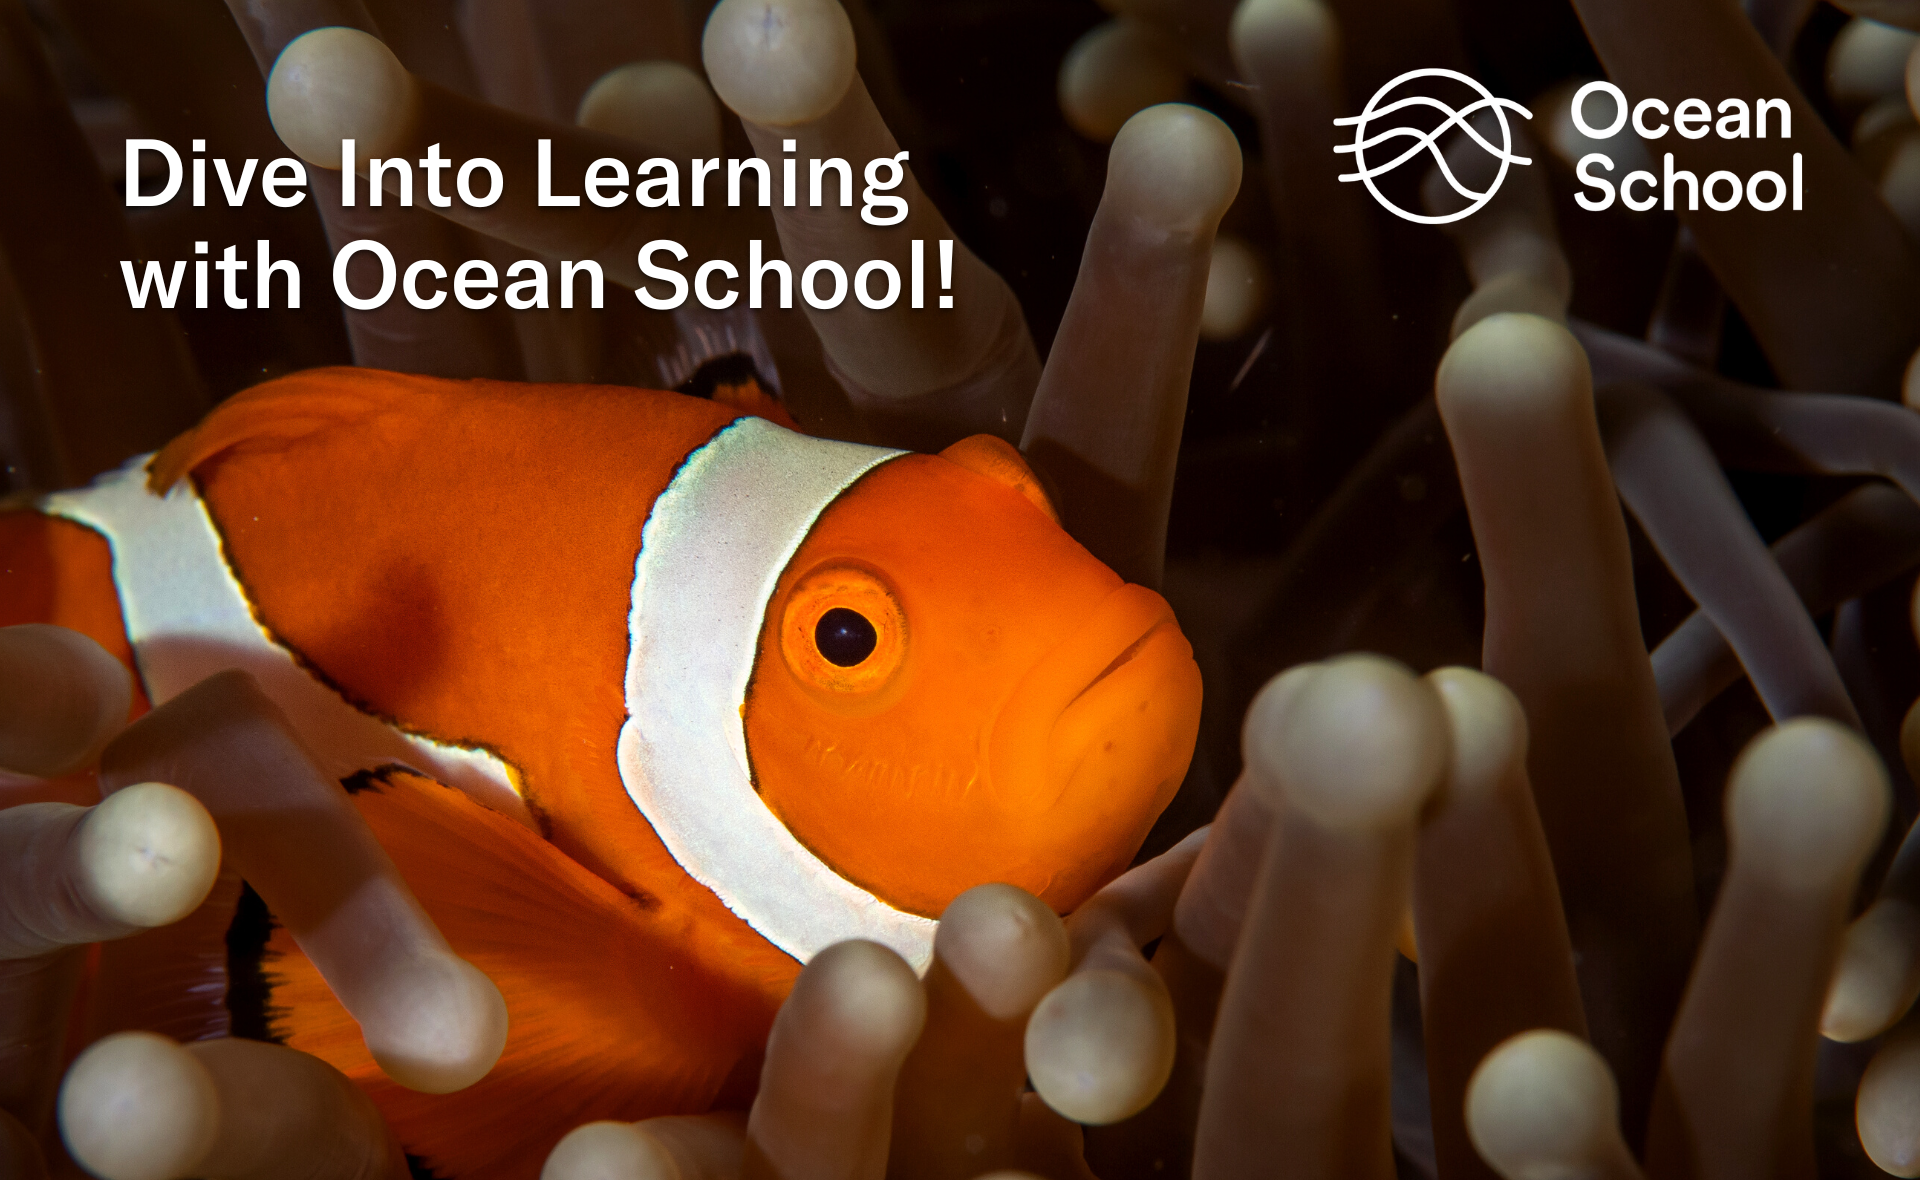 Promotional poster of the Ocean School "Dive Into Learning" information session. The background picture is a goldfish swimming through a brown aquatic plant.